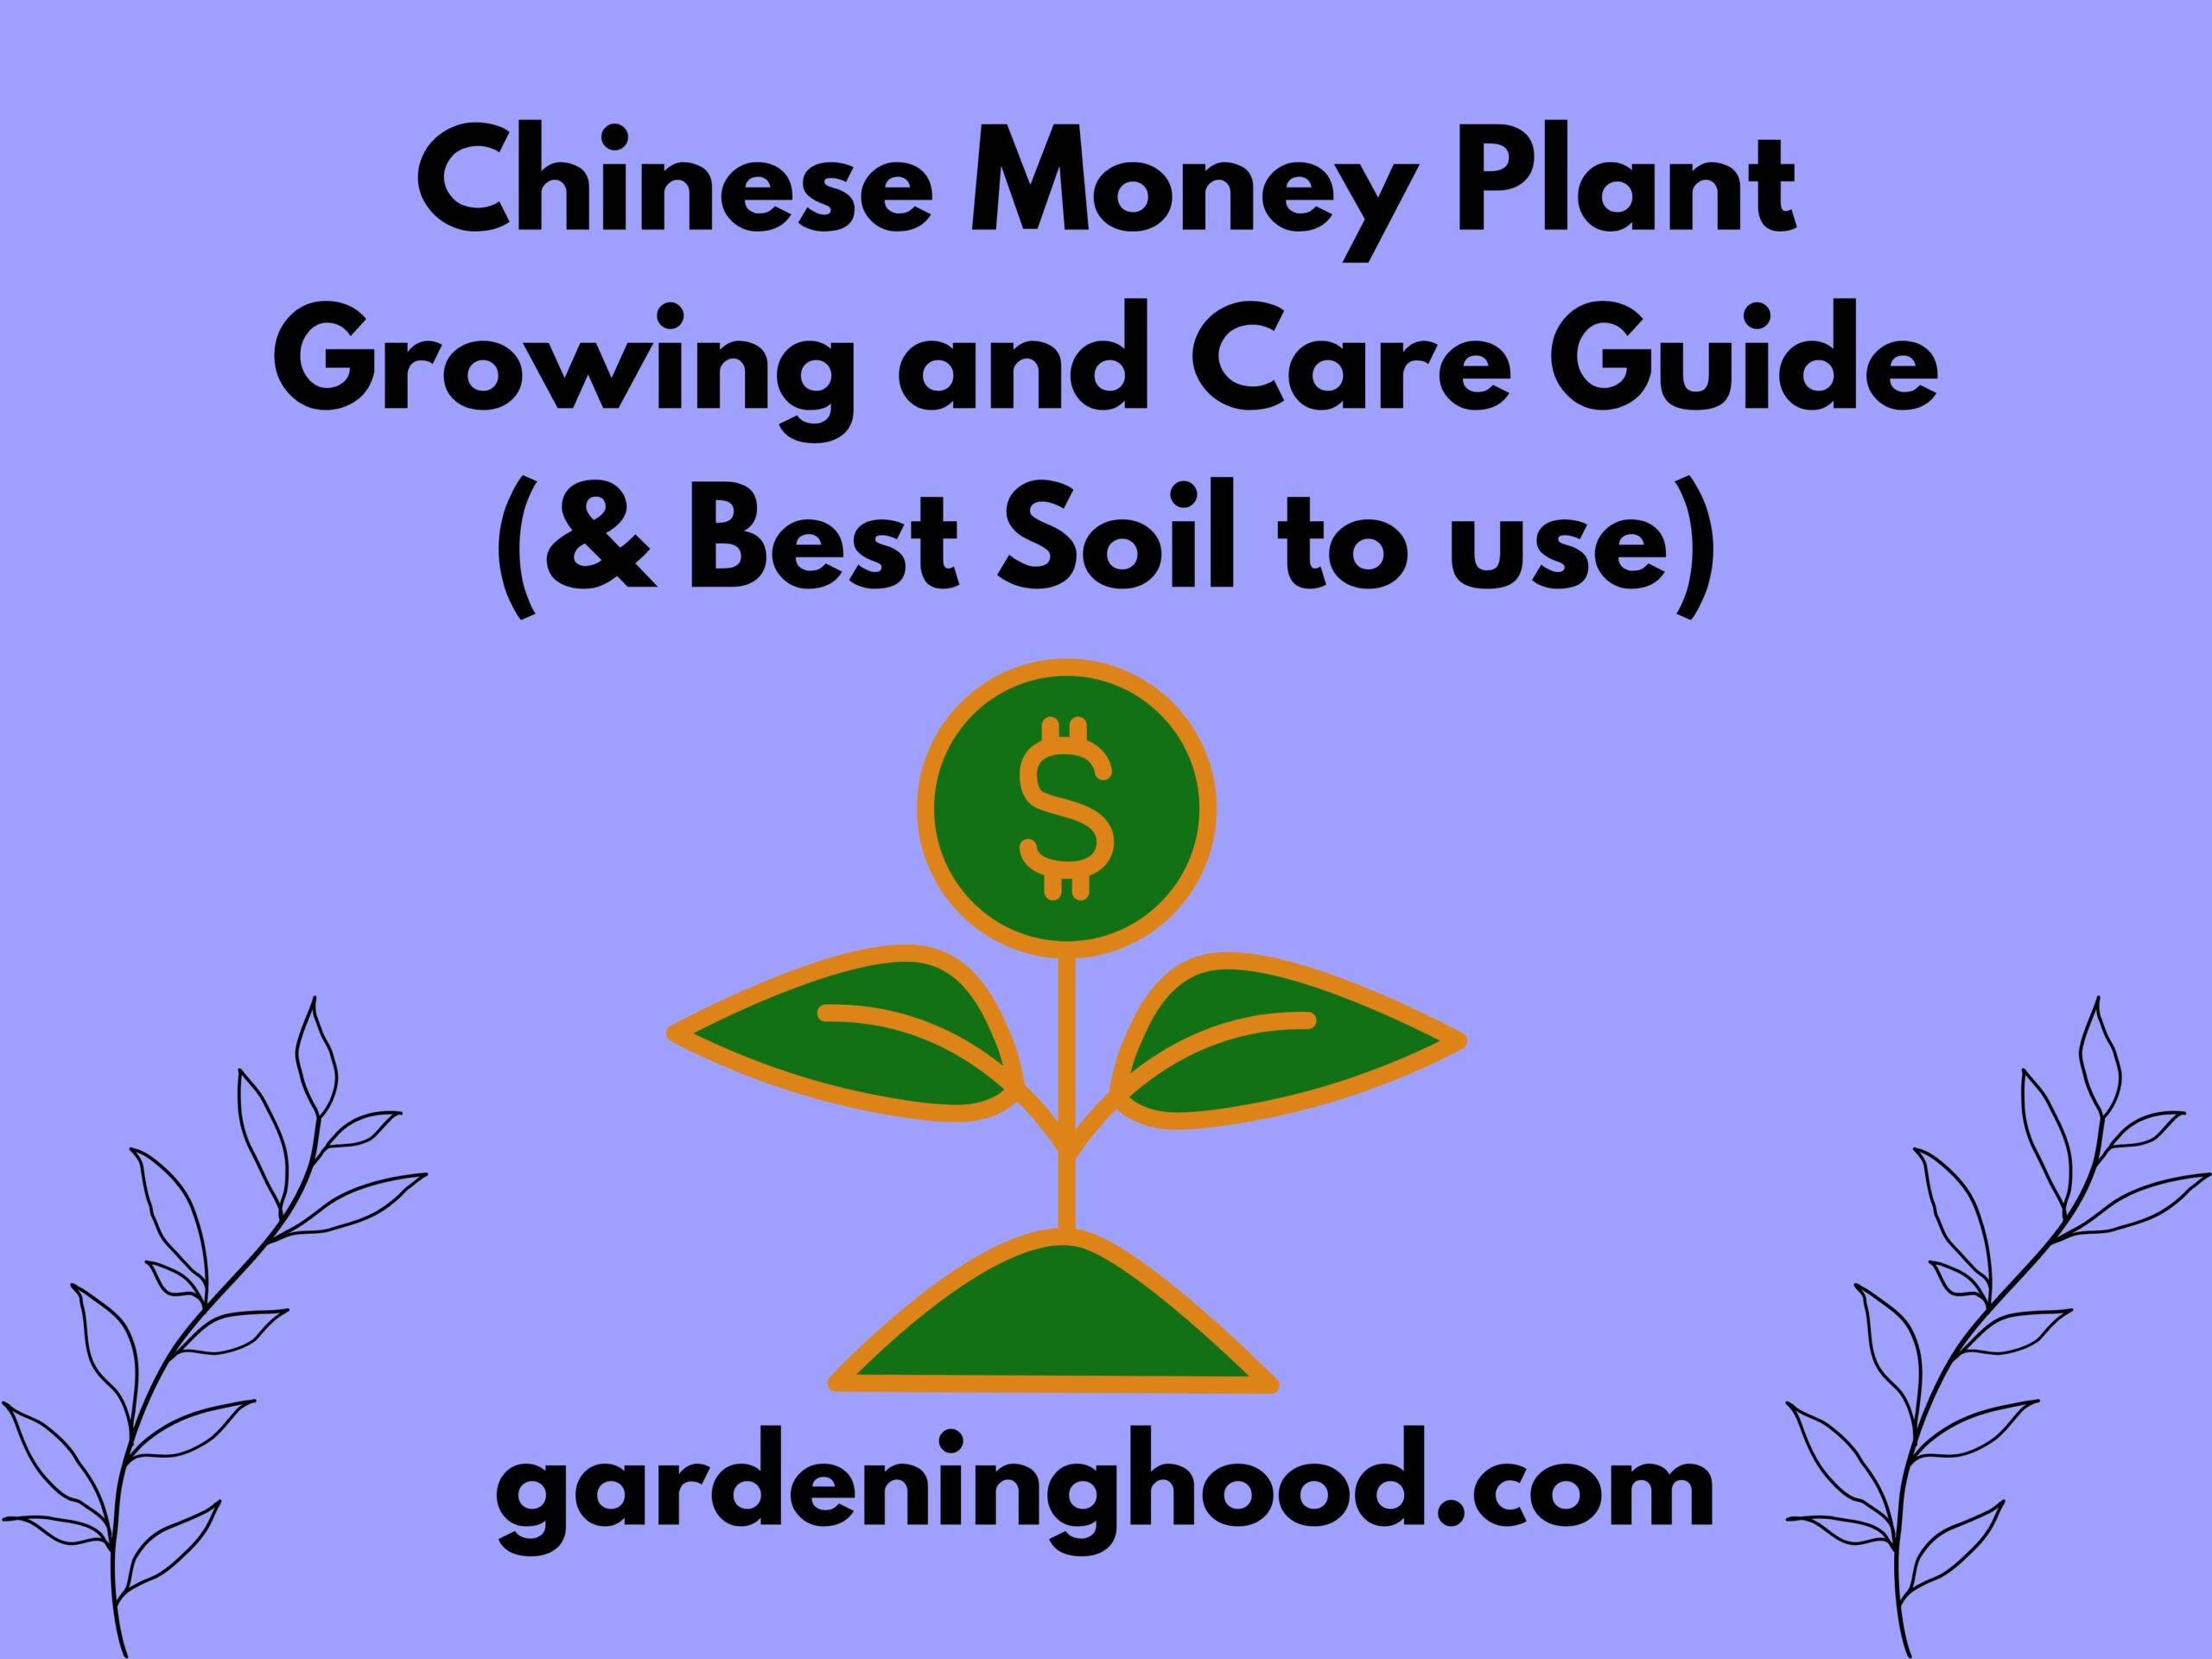 Chinese Money Plant Growing and Care Guide (& Best Soil to use)